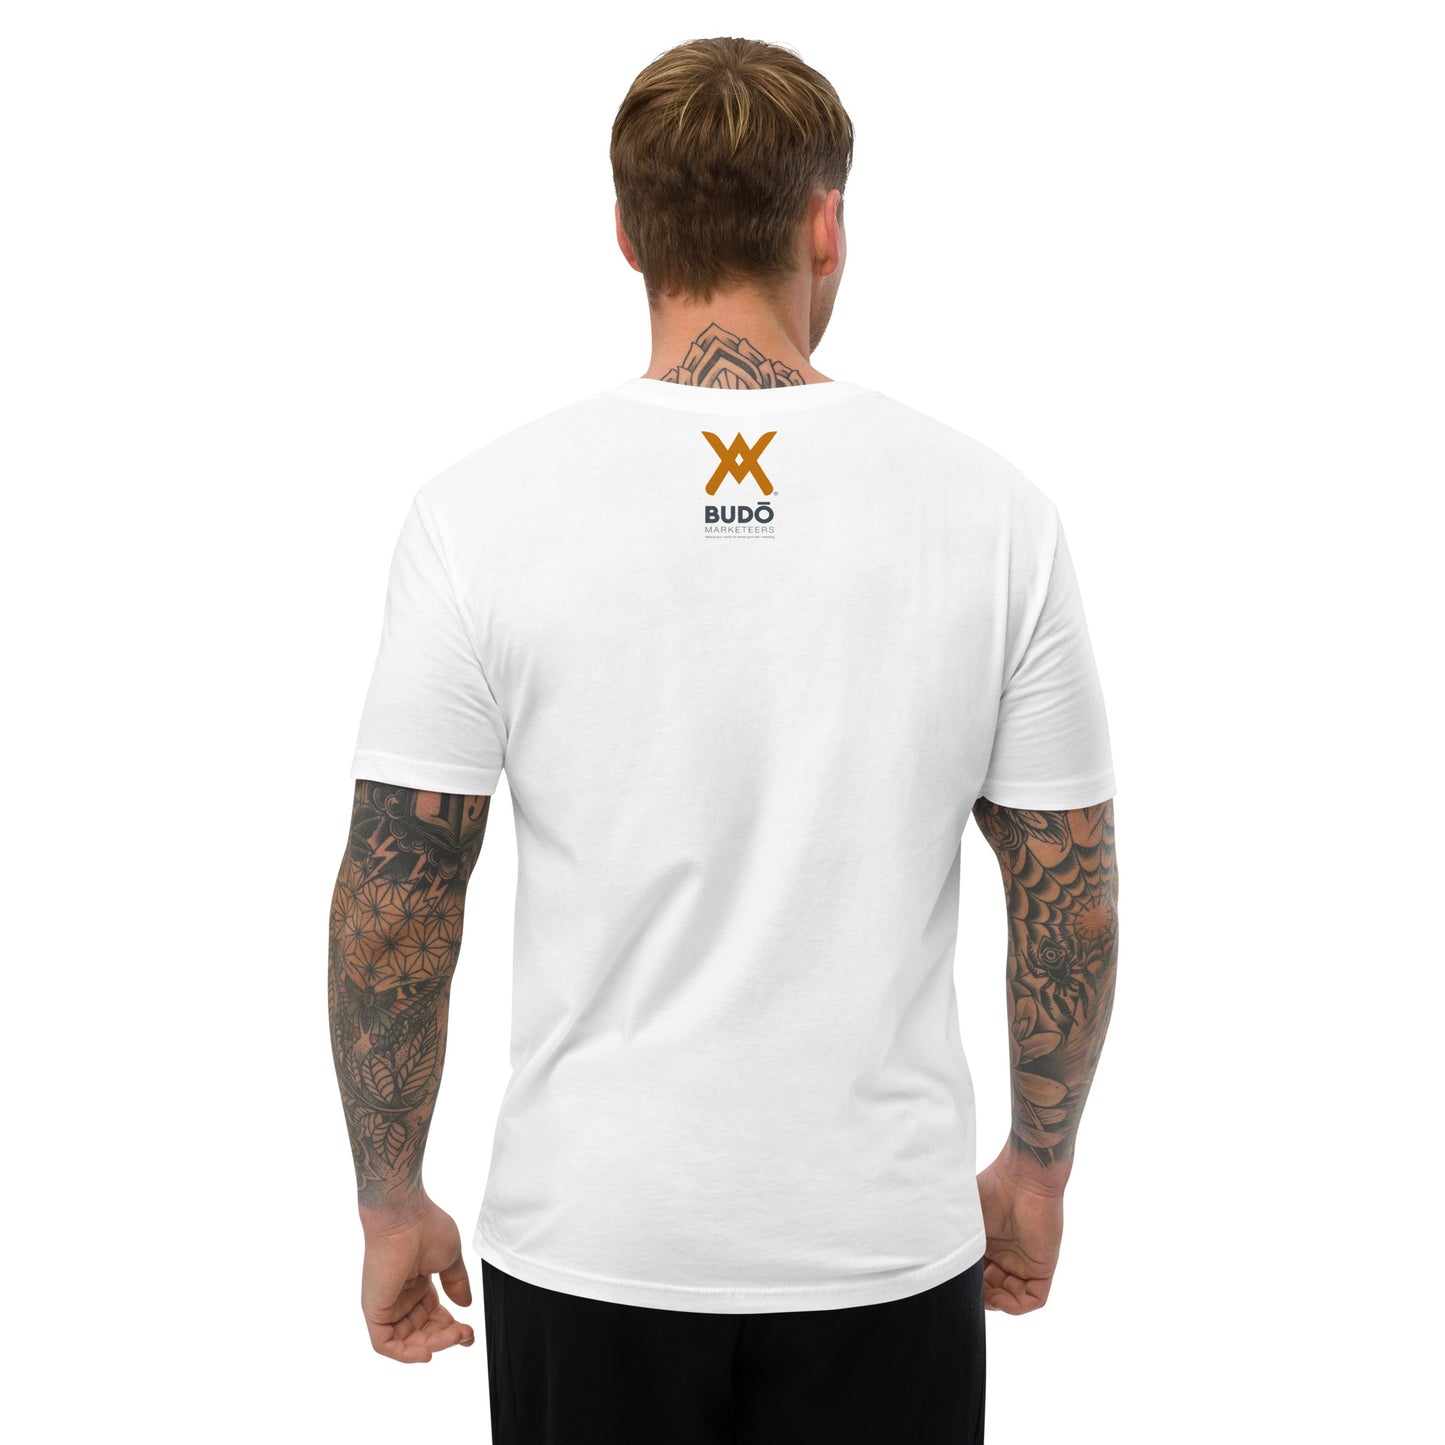 Budō Marketeers Official 'Hashtag' Short Sleeve T-shirt